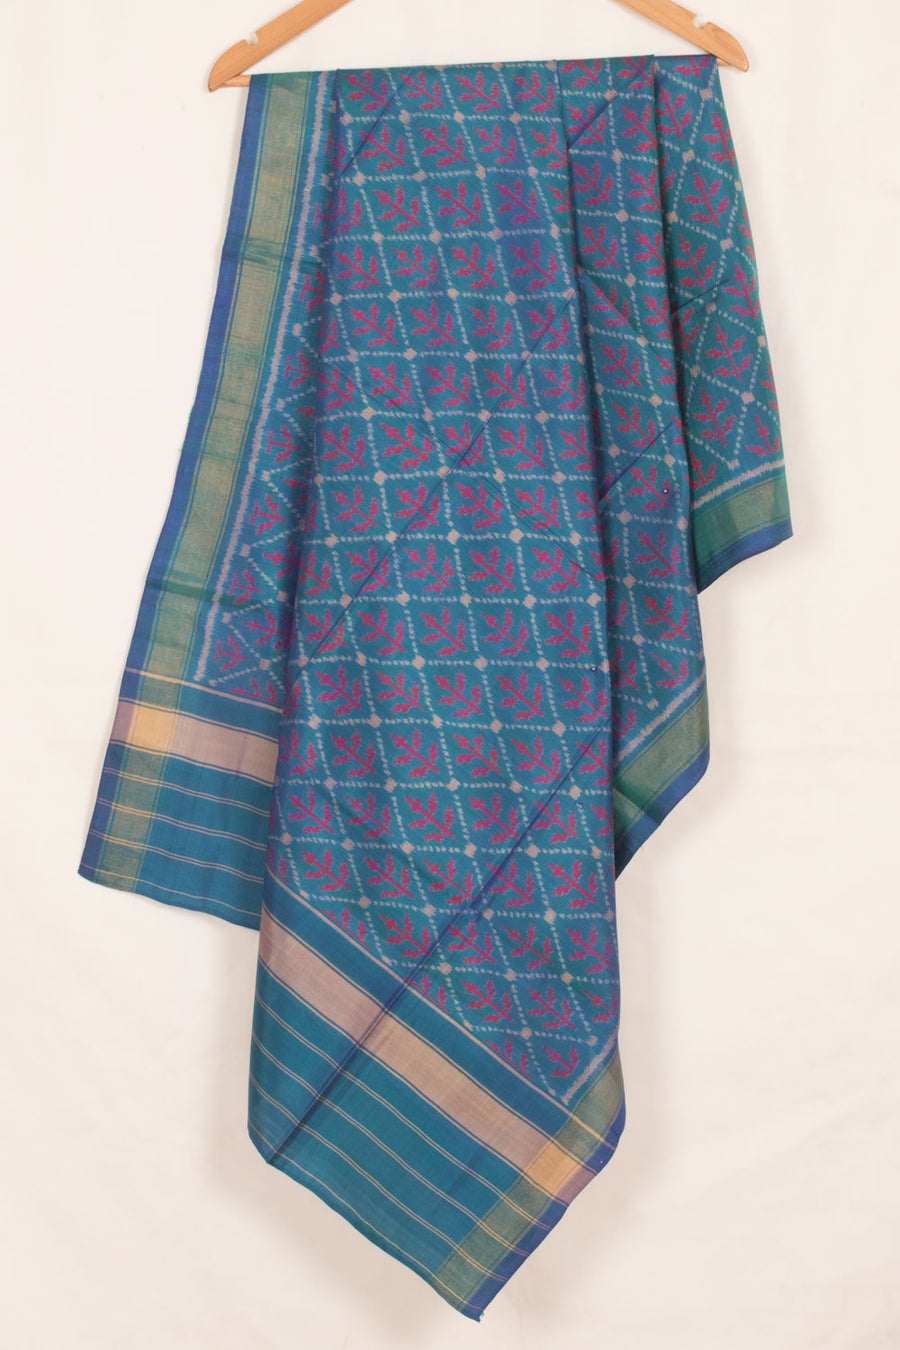 Handcrafted Patola Ikat Mulberry Silk Dupatta with Tissue Border 